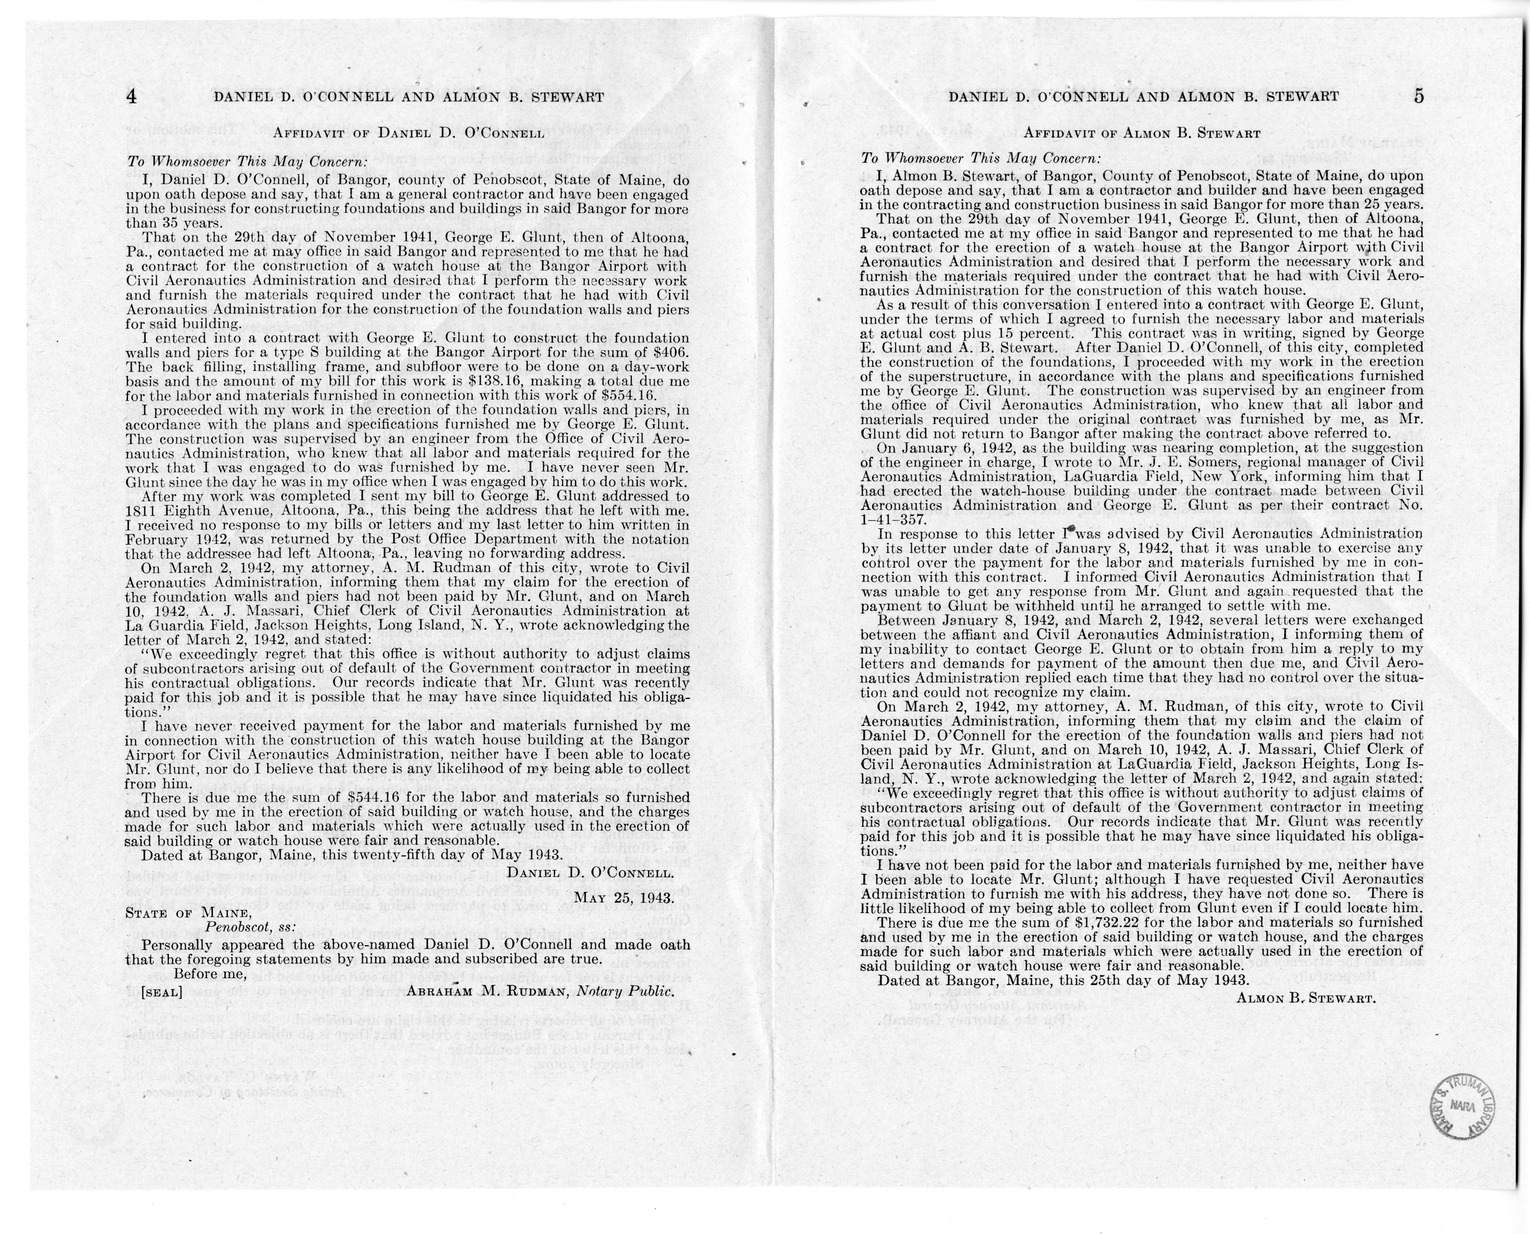 Memorandum from Harold D. Smith to M. C. Latta, H.R. 1303, For the Relief of Daniel D. O'Connell and Almon B. Stewart, with Attachments